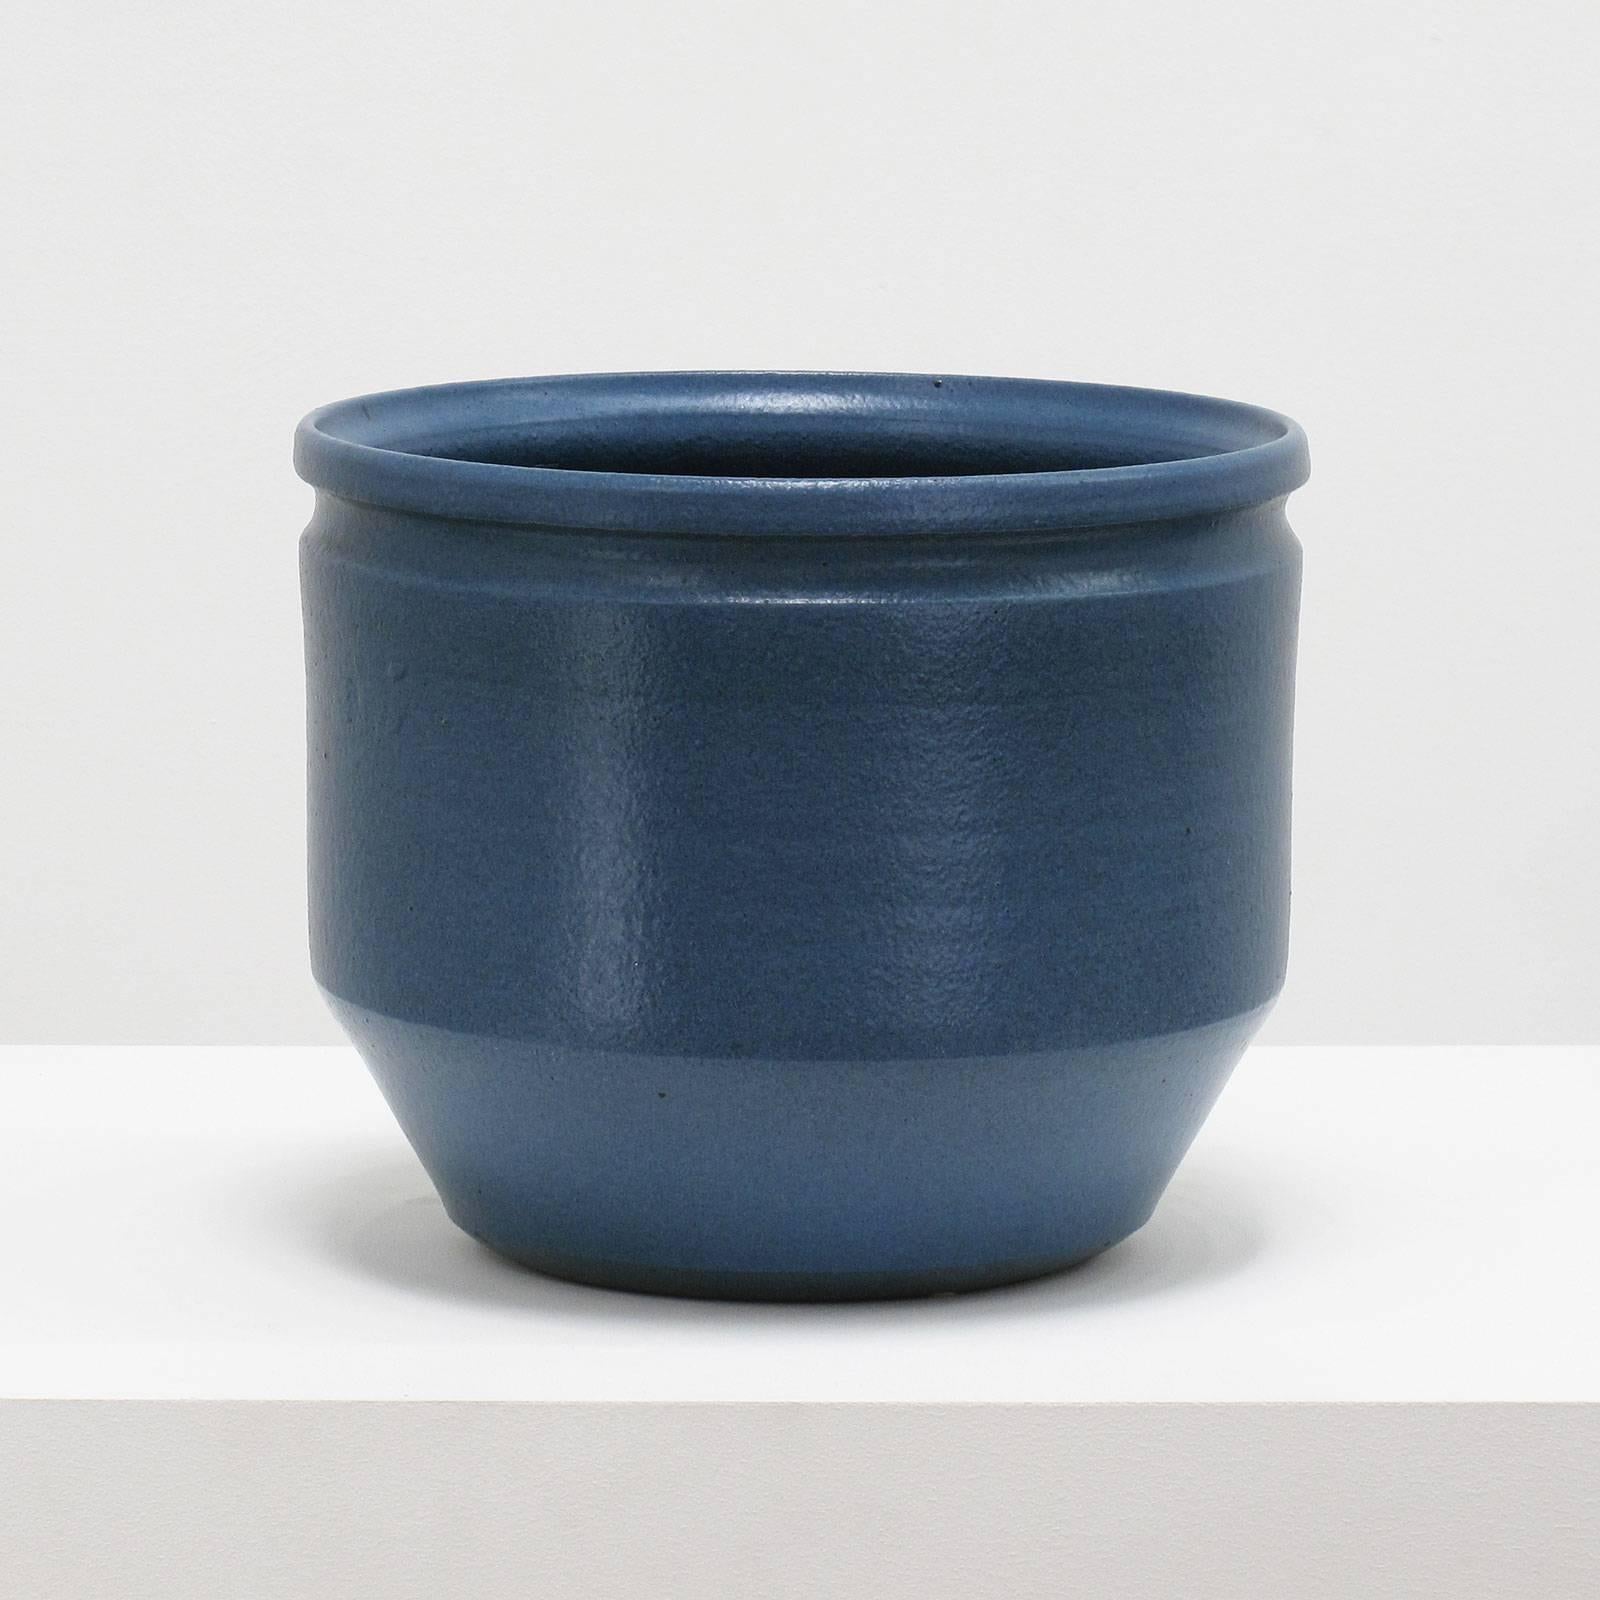 David Cressey and Robert Maxwell Ceramic Planter, Glazed Blue, 1970s In Excellent Condition For Sale In Los Angeles, CA